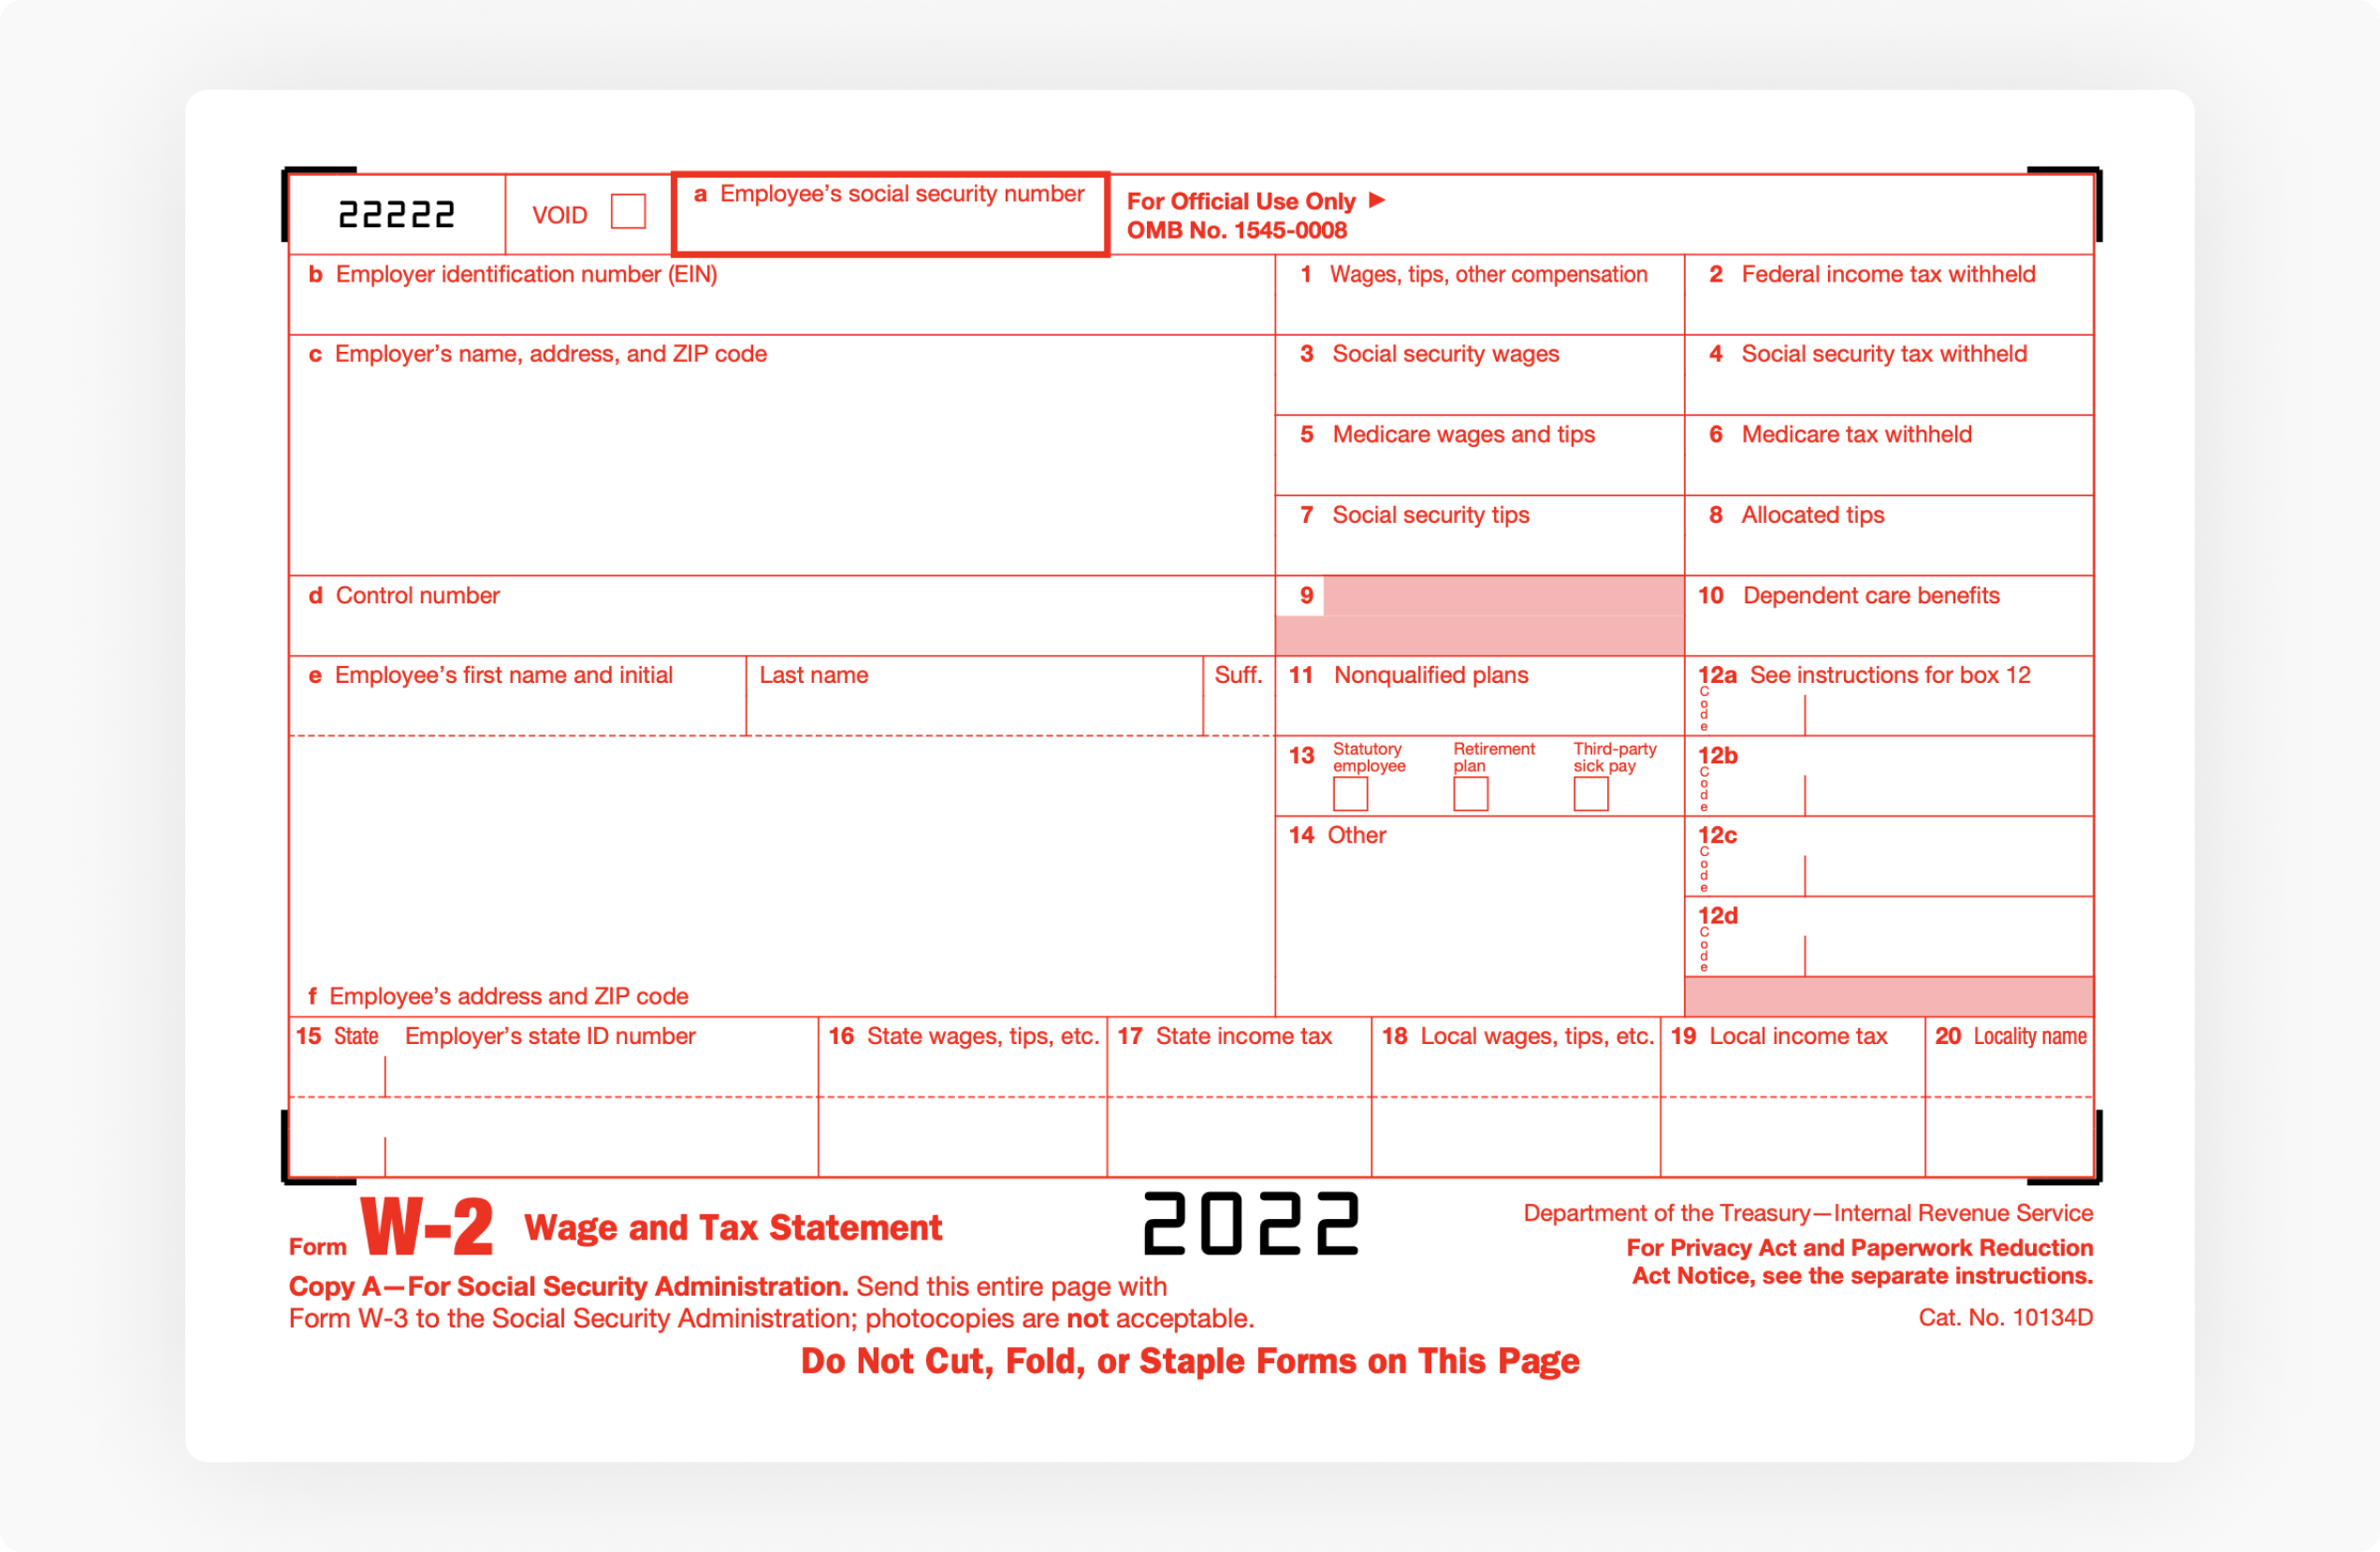 Top 10 Irs Forms List Us Taxpayers Need To Know About - Pdffiller Blog within Irs Forms 2022 W2